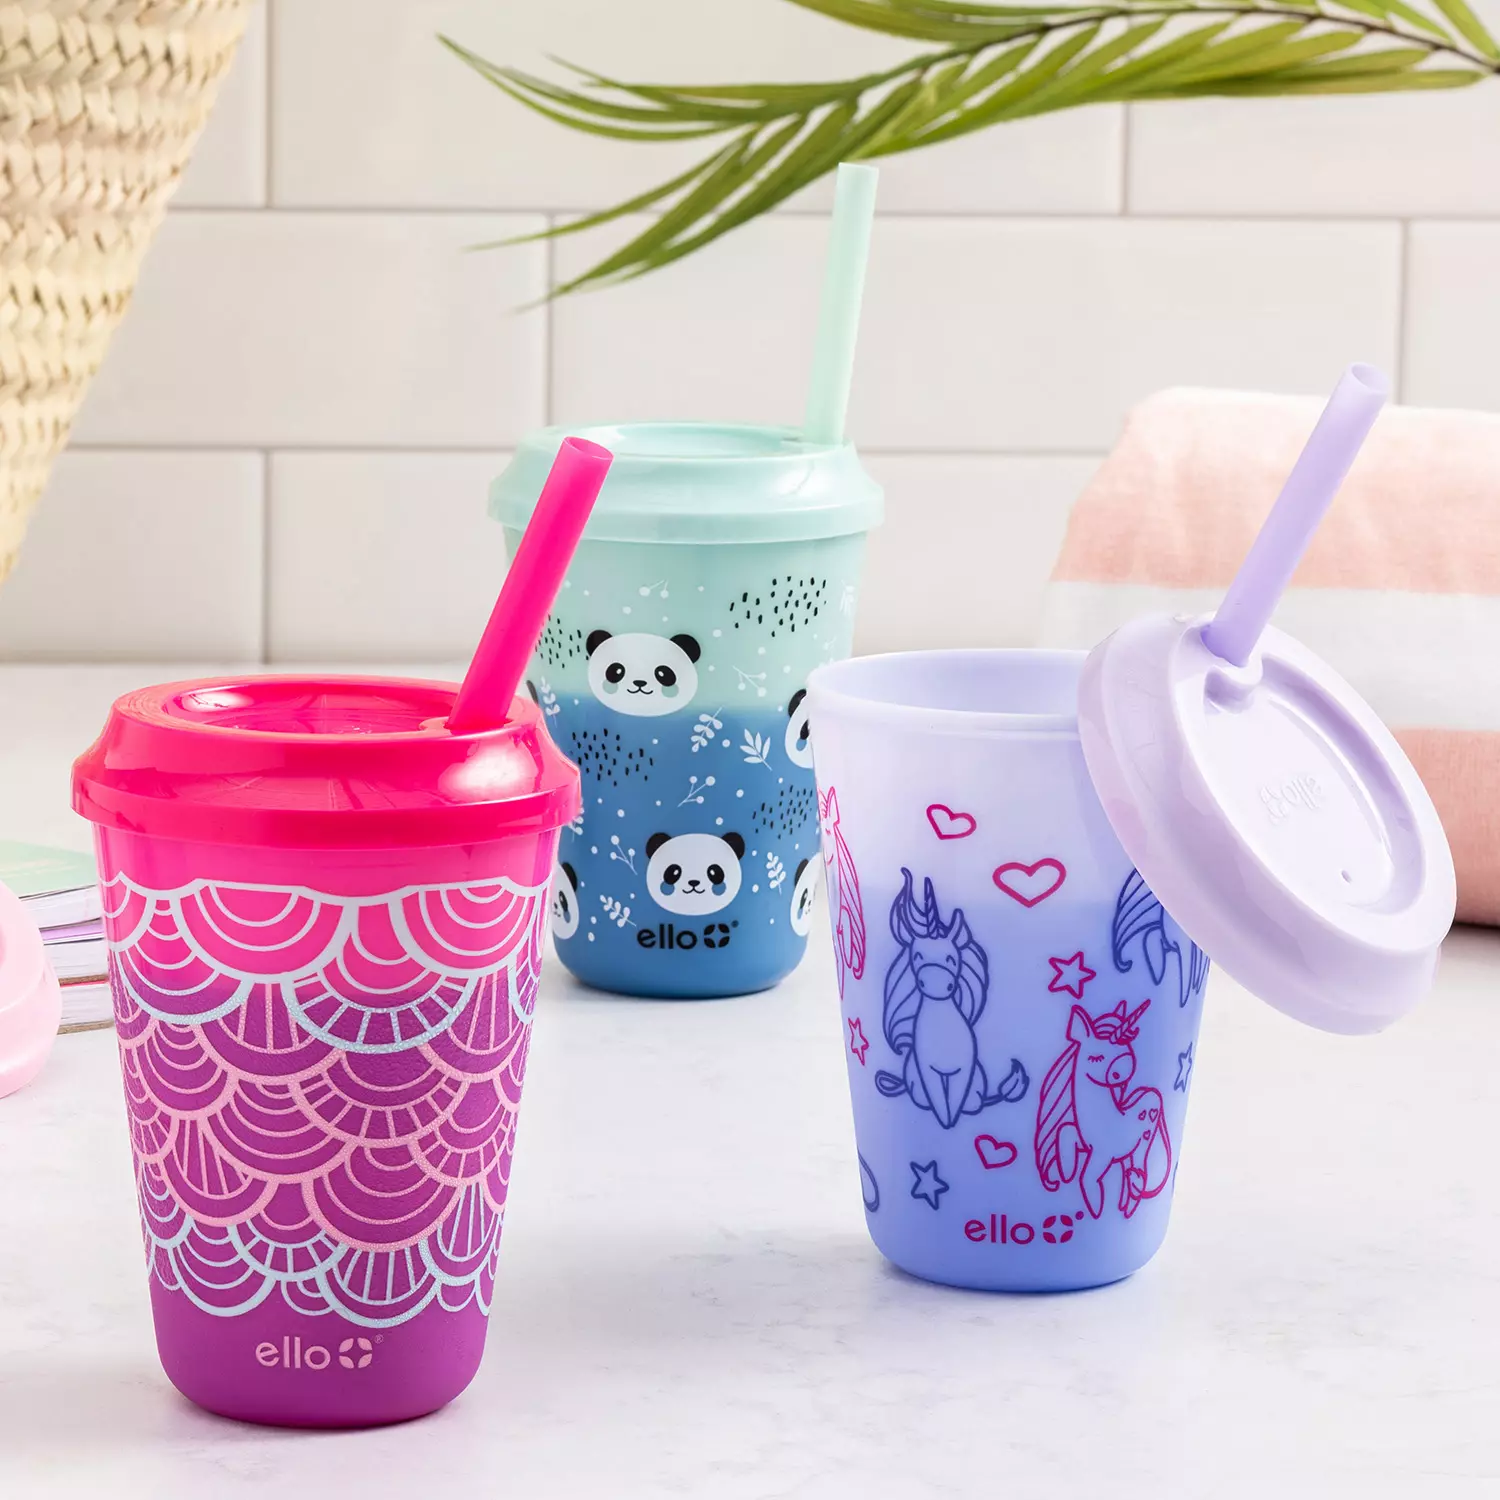 Ello Kids 12-Ounce Color Changing Tumblers with Lids and Straws